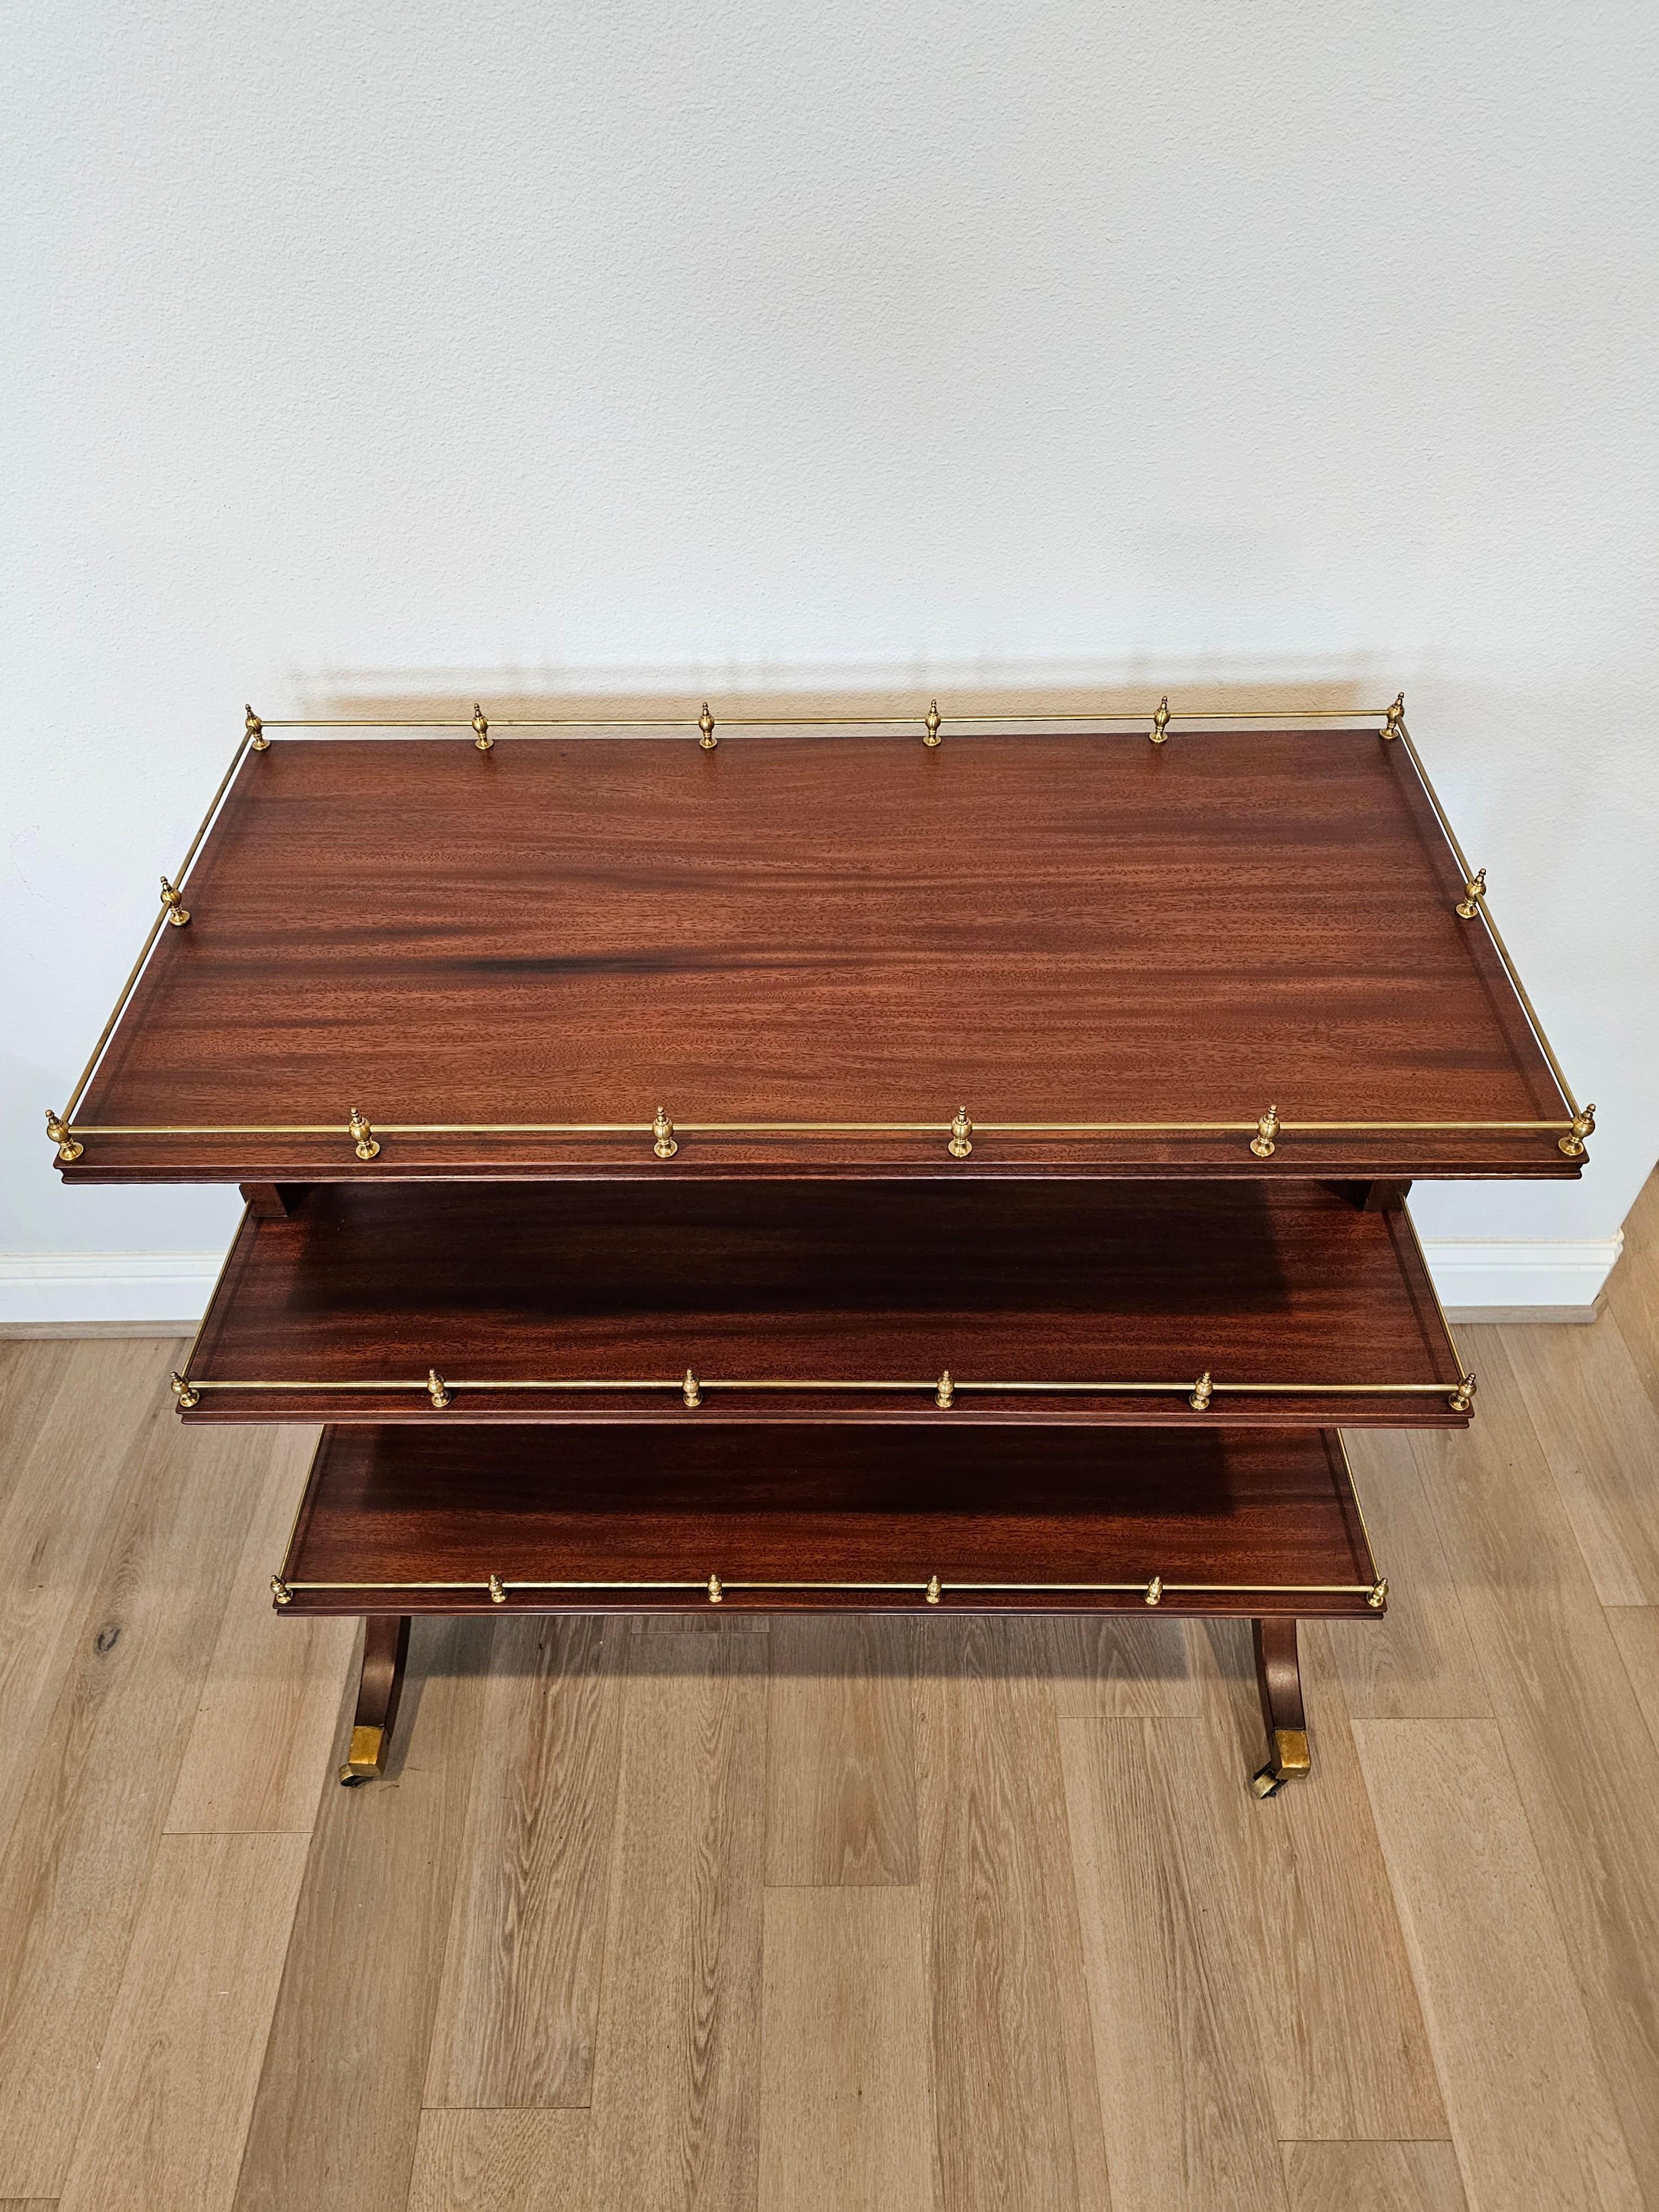 A early 20th century American three-tiered mahogany drinks trolley dessert server signed Marlboro Manor
Fine Furniture by H. Sacks & Sons

Finely hand-crafted in the United States, circa 1920s-1930s, featuring three beautiful richly grained